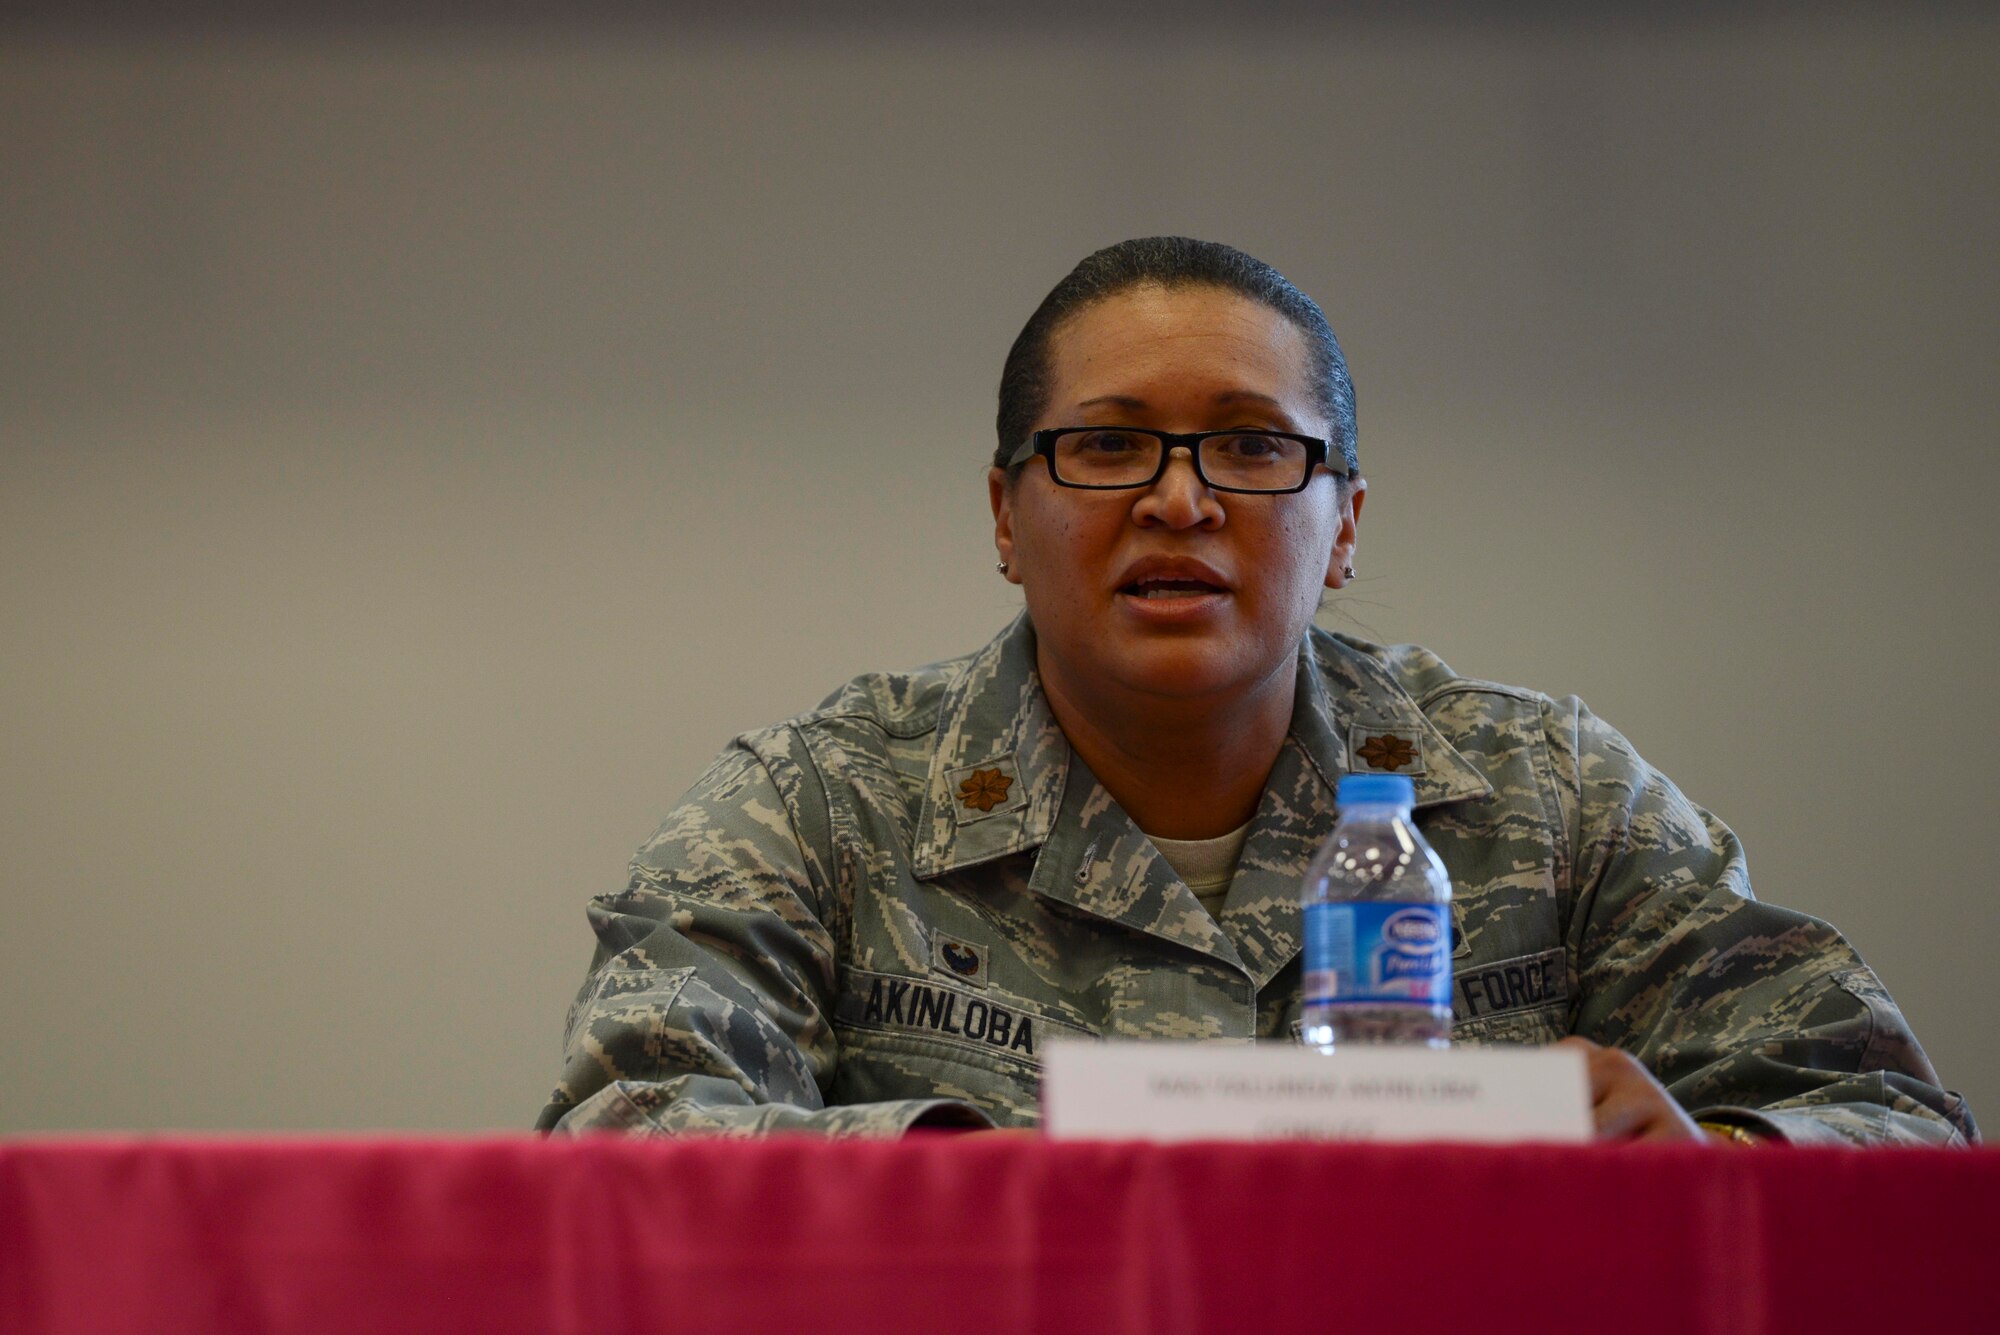 U.S. Air Force Maj. Yalunda Akinloba, 39th Contracting Squadron commander, speaks during Incirlik’s International Women’s Day lunch and learn event March 8, 2017, at Incirlik Air Base, Turkey. Akinloba shared her challenges and successes as a commander in the Air Force. (U.S. Air Force photo by Airman 1st Class Devin M. Rumbaugh)